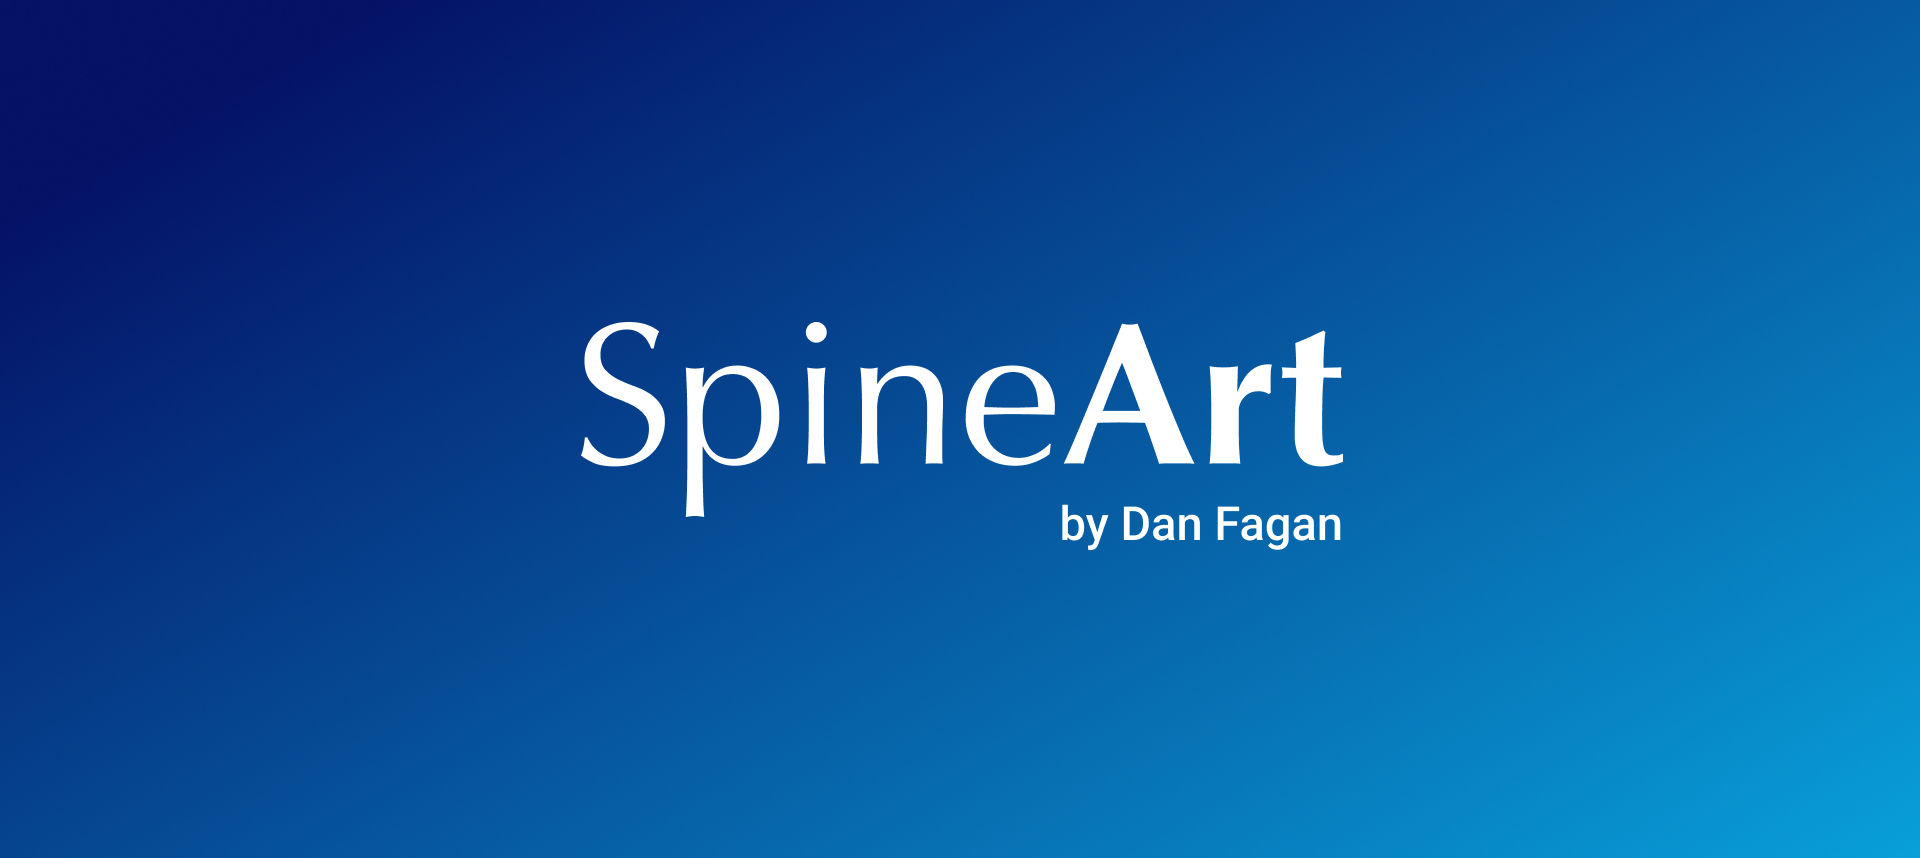 Spine Art is first for Clear Price information in the UK